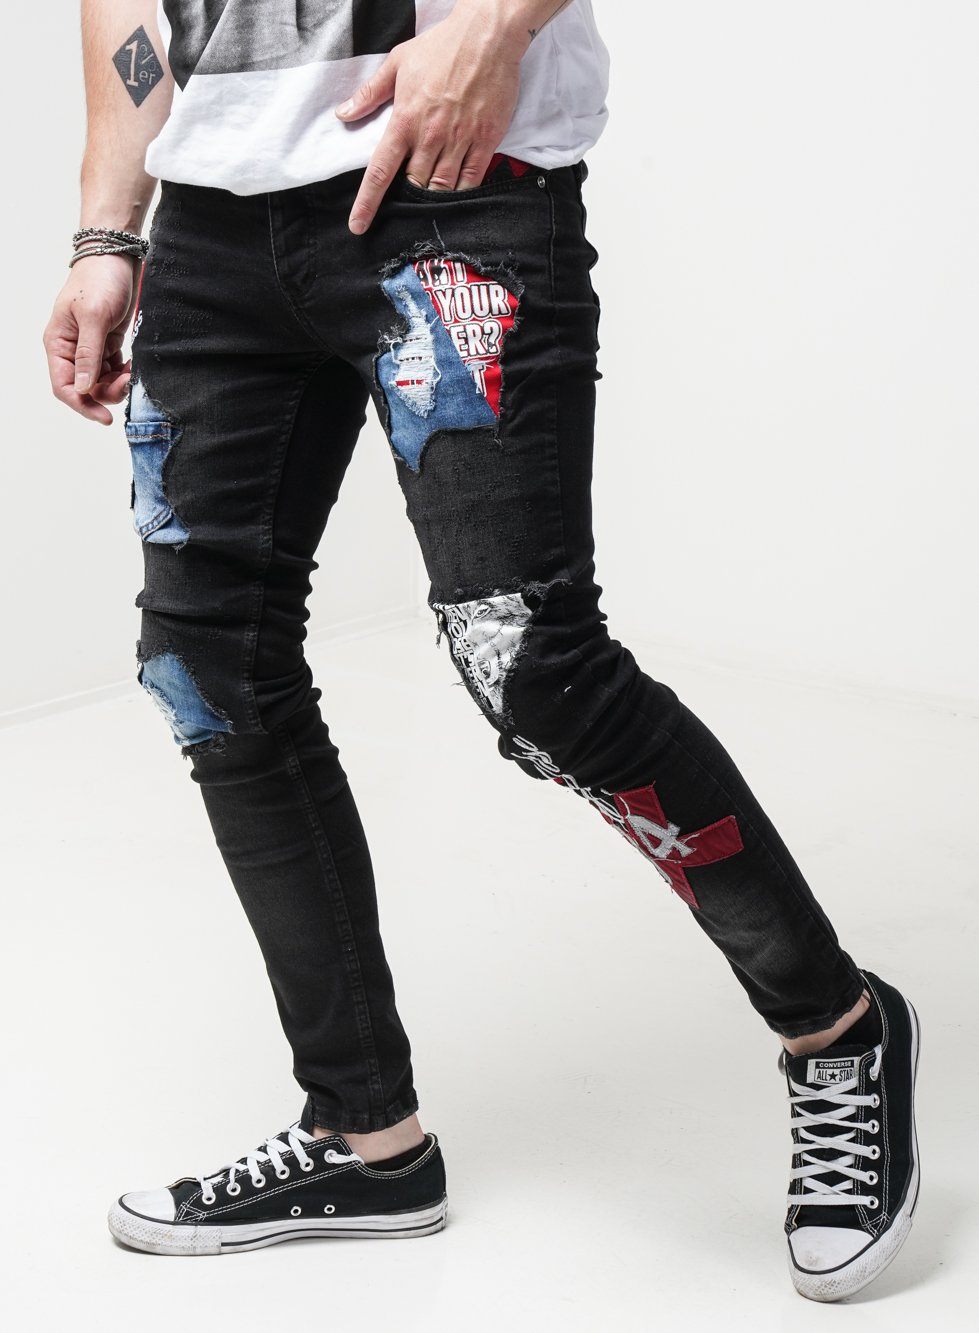 A man sporting stylish, ripped INSIDER skinny jeans and sneakers.